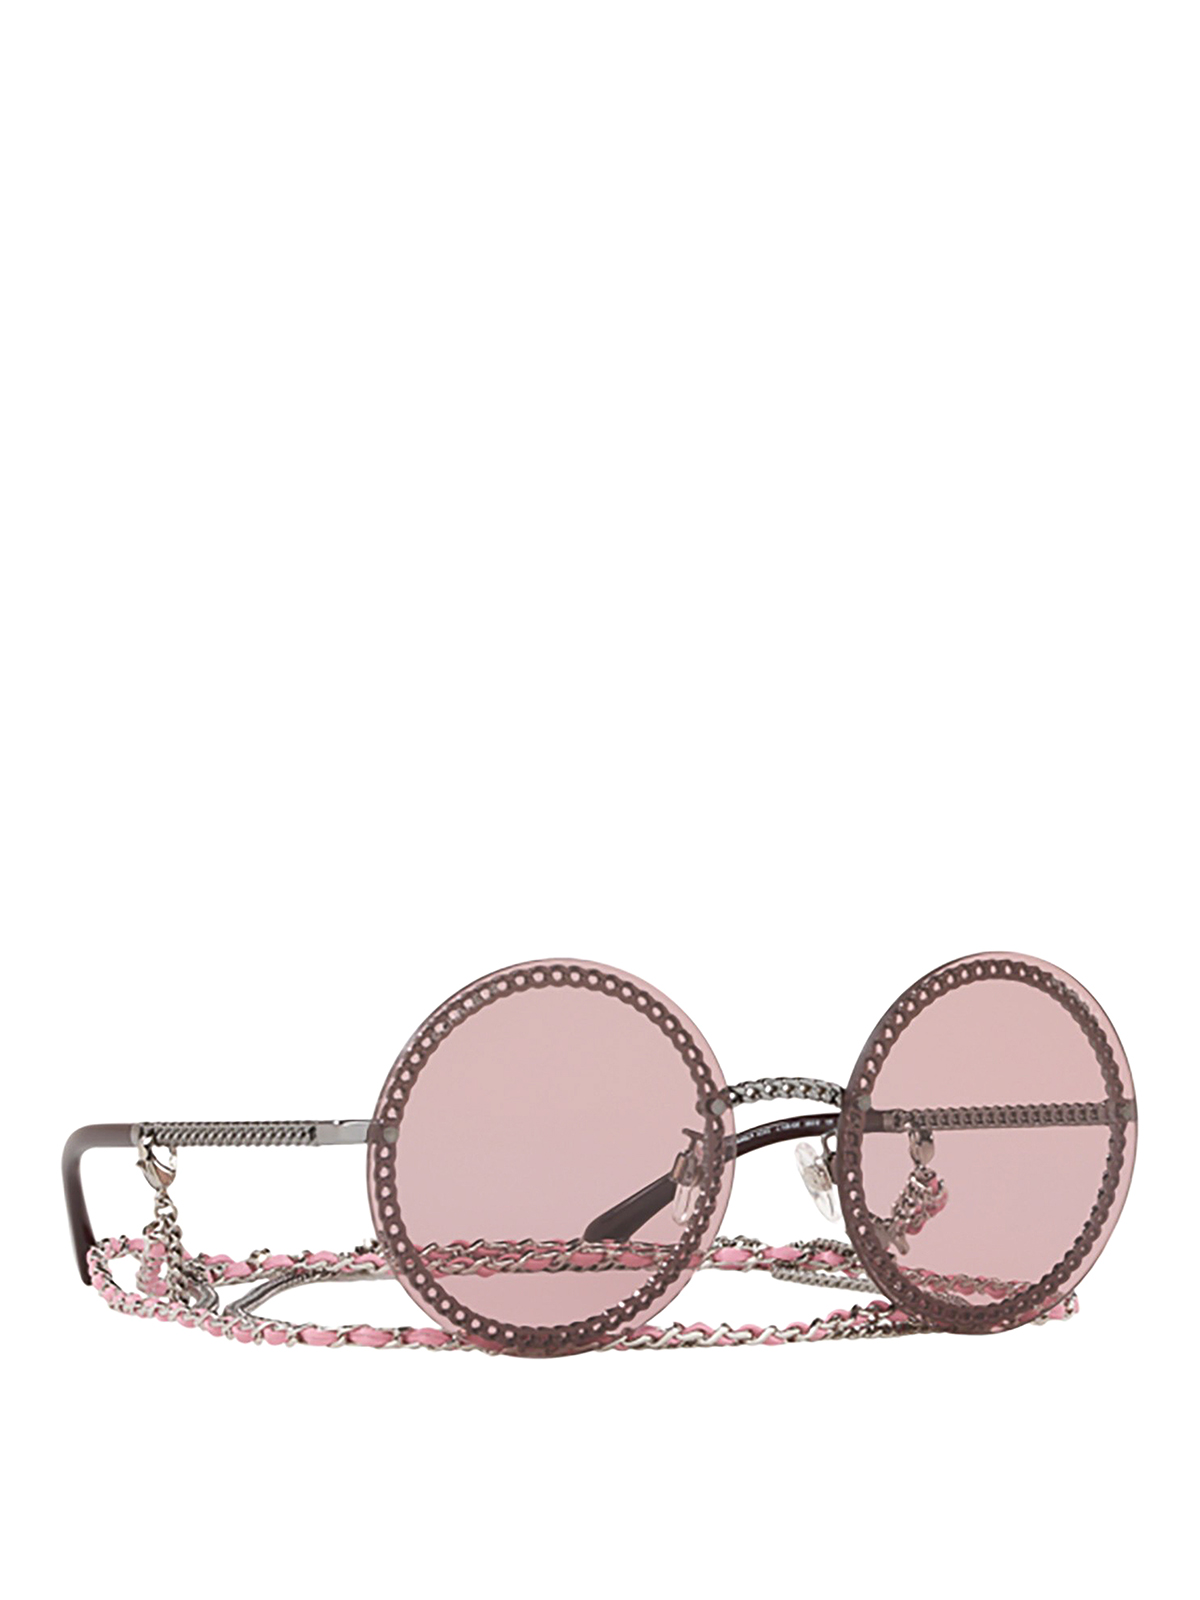 Pre-owned Chanel Chain Embellished Pink Round Sunglasses